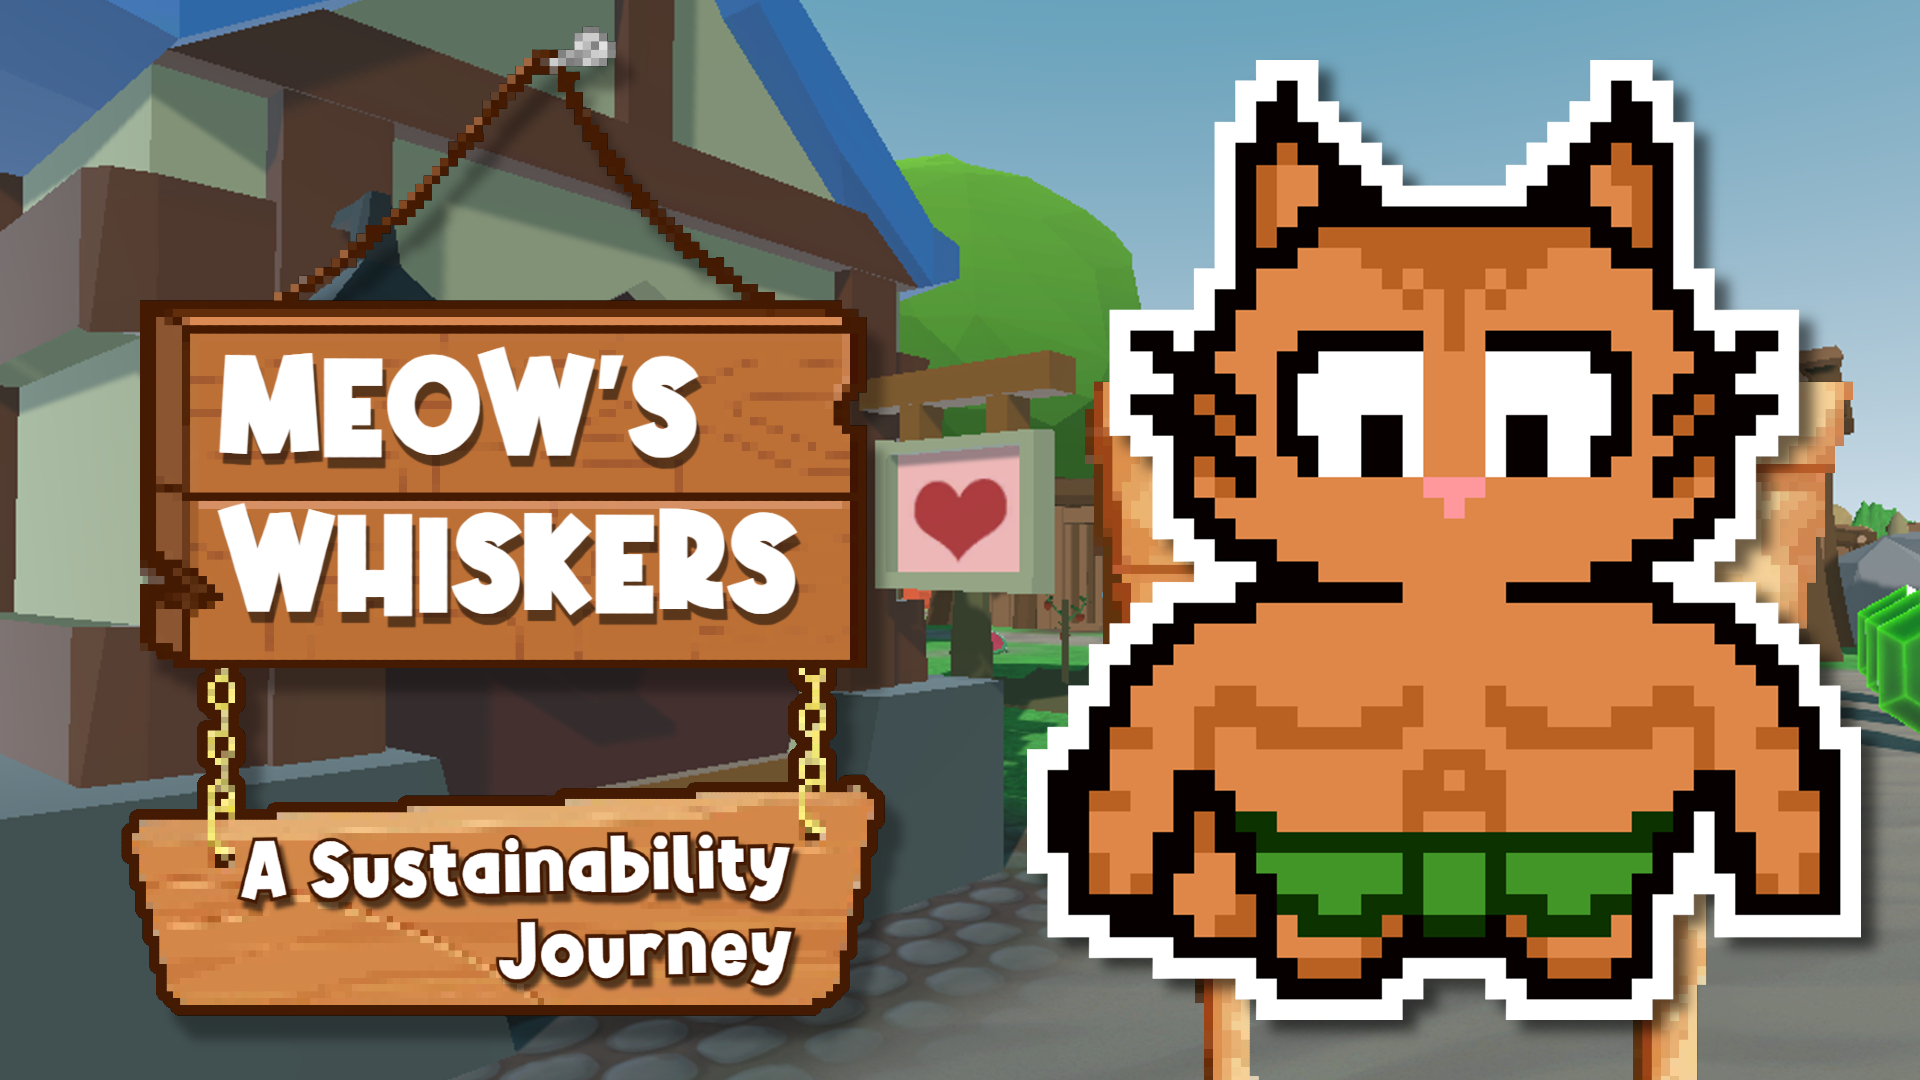 Meow's Whiskers: A Sustainability Journey